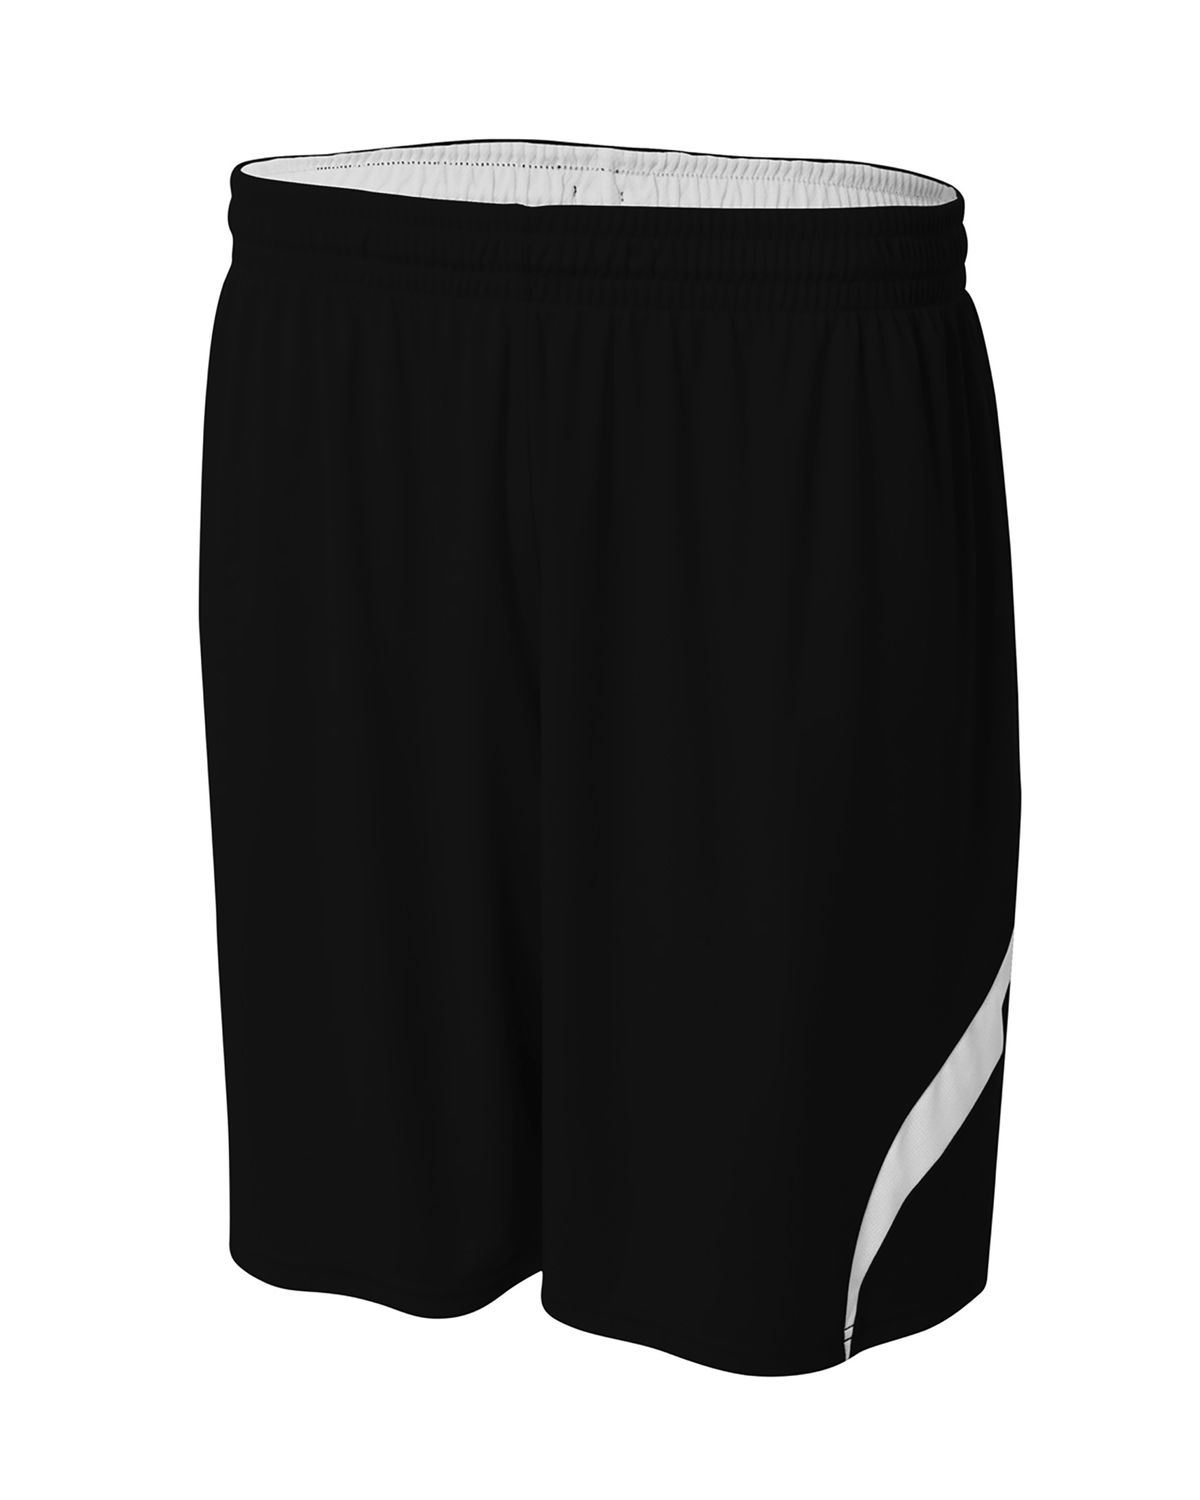 'A4 N5364 Adult Performance Doubl/Double Reversible Basketball Short'